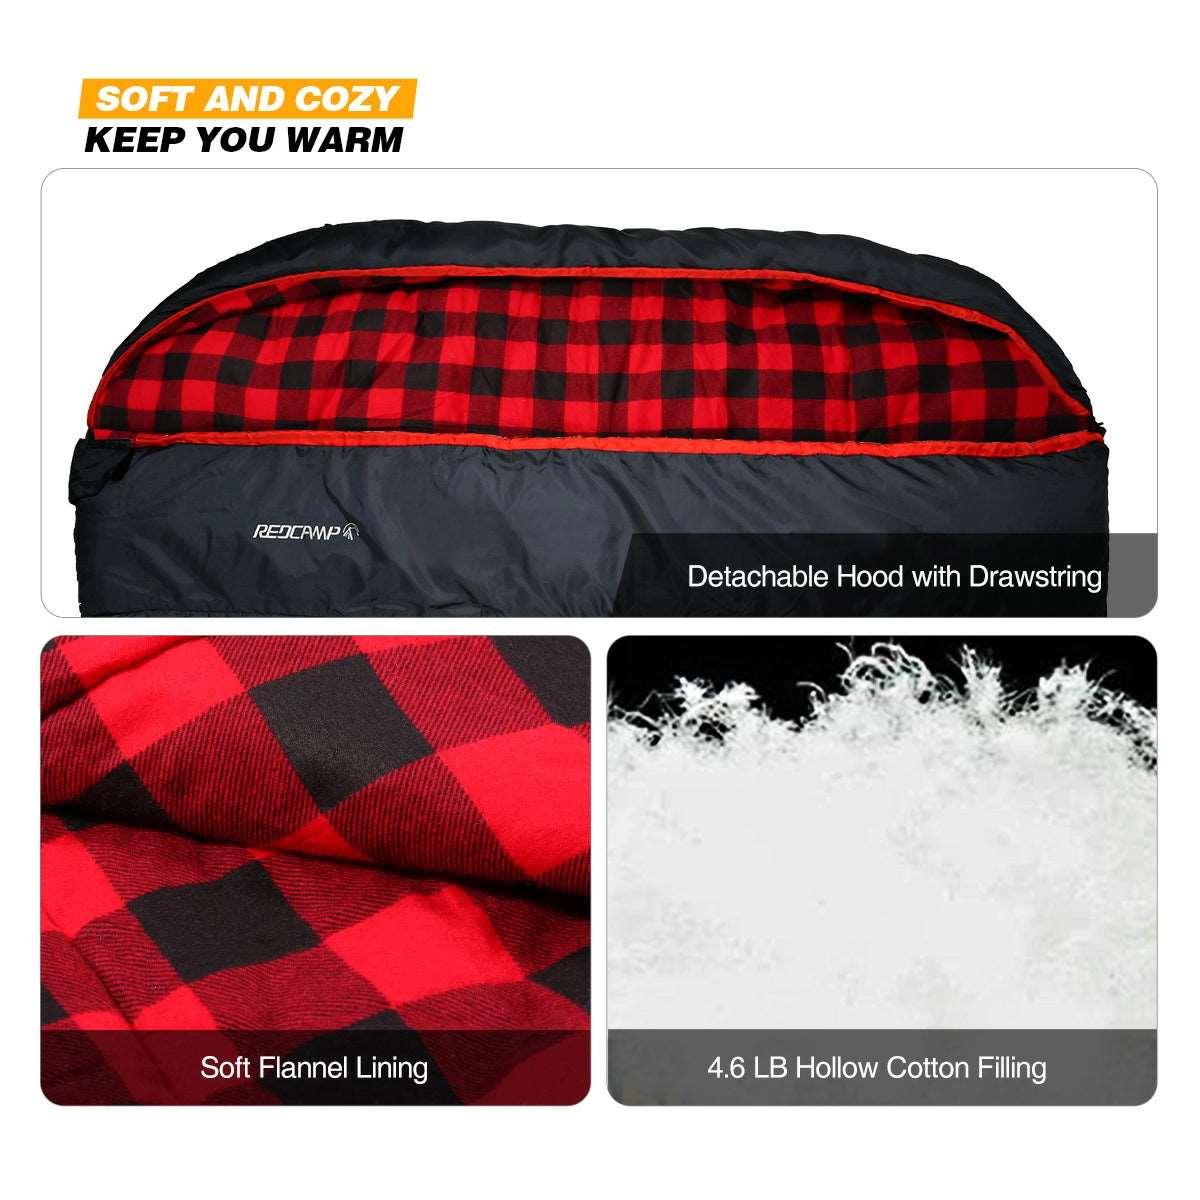 23˚F Cotton Double Sleeping Bag for Adults